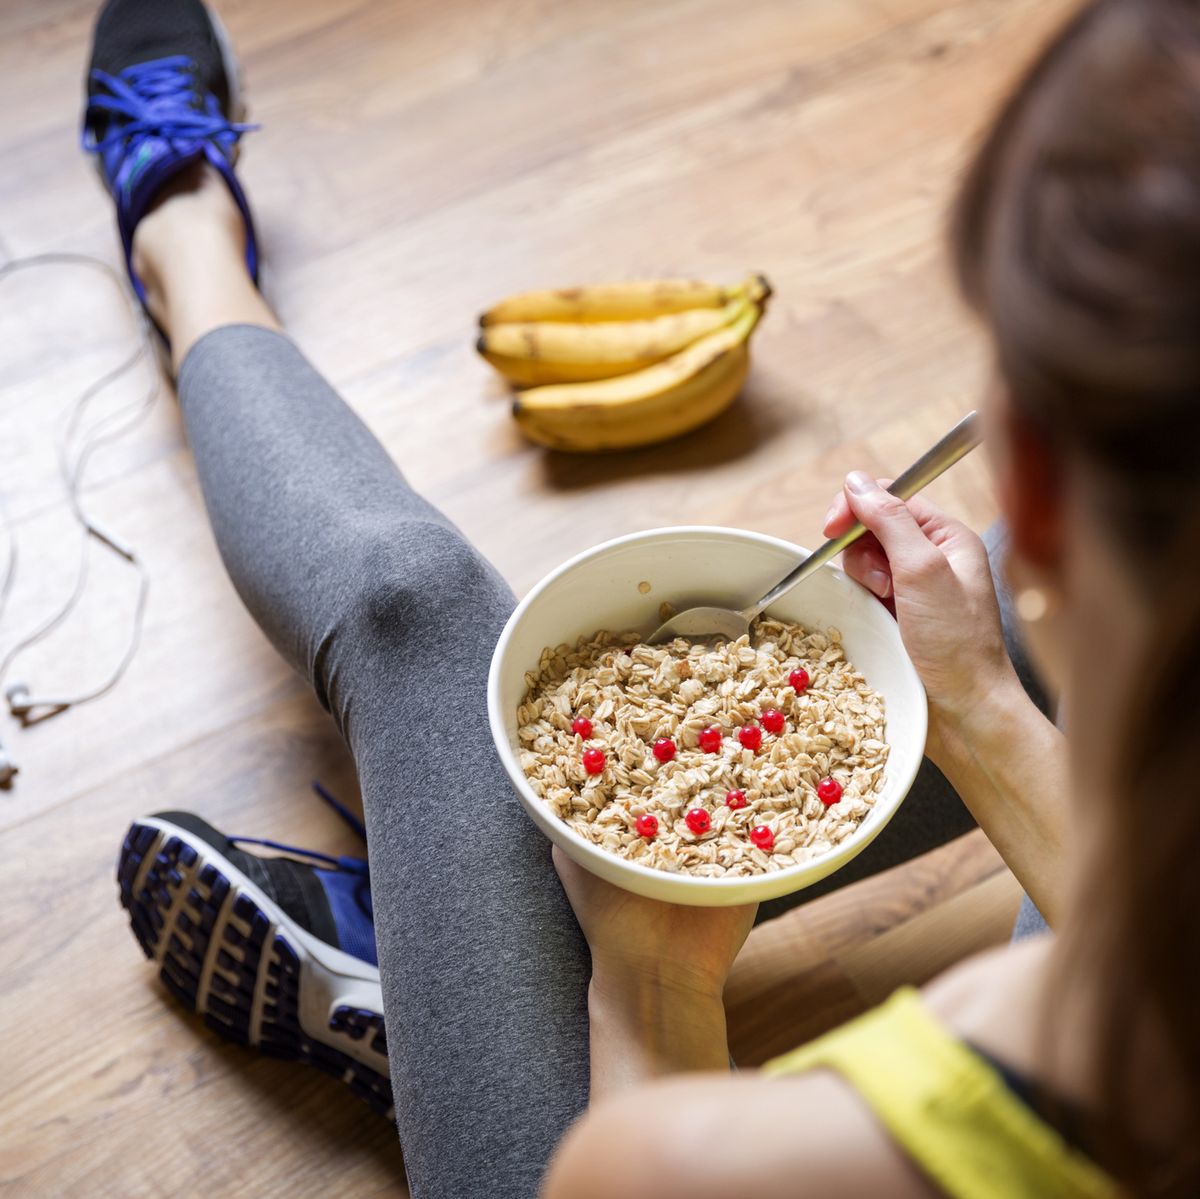 4. Experiment with Pre-Workout Meals and Snacks